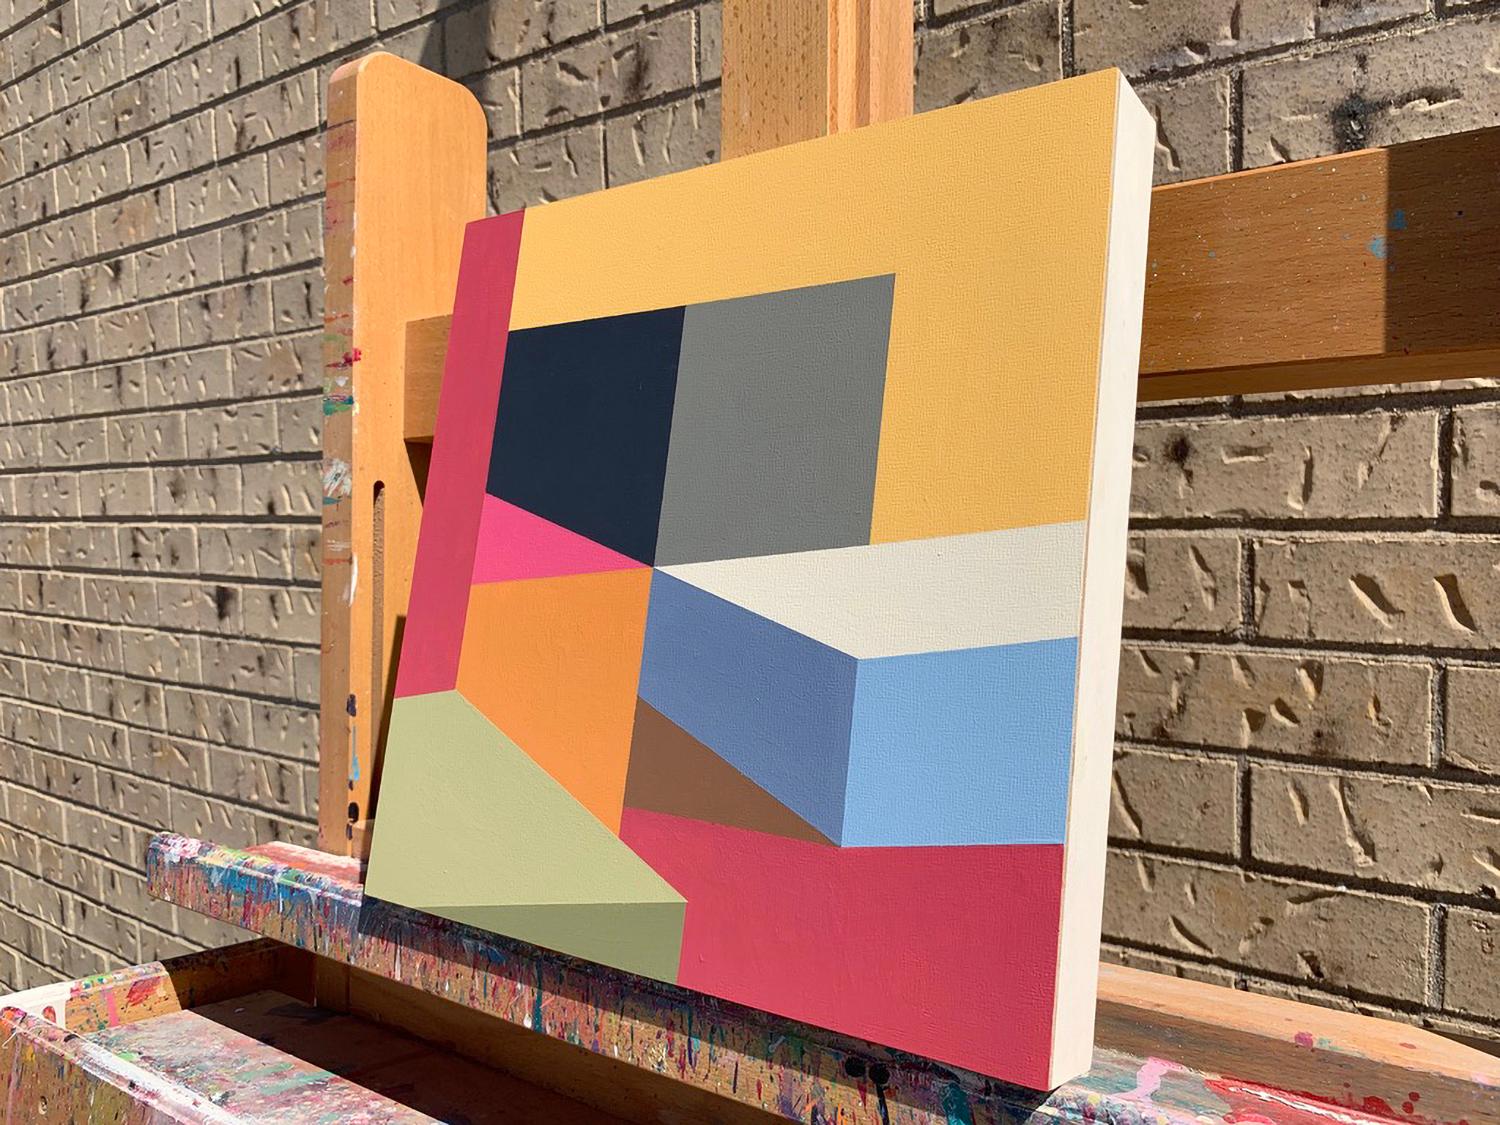 <p>Artist Comments<br>Painting what he calls Architectural Abstractions, artist Craig Rouse imagines a minimalist setting of geometric shapes. He constructs sleek linework with a limited palette of 14 colors. Part of his NAR series, meaning No